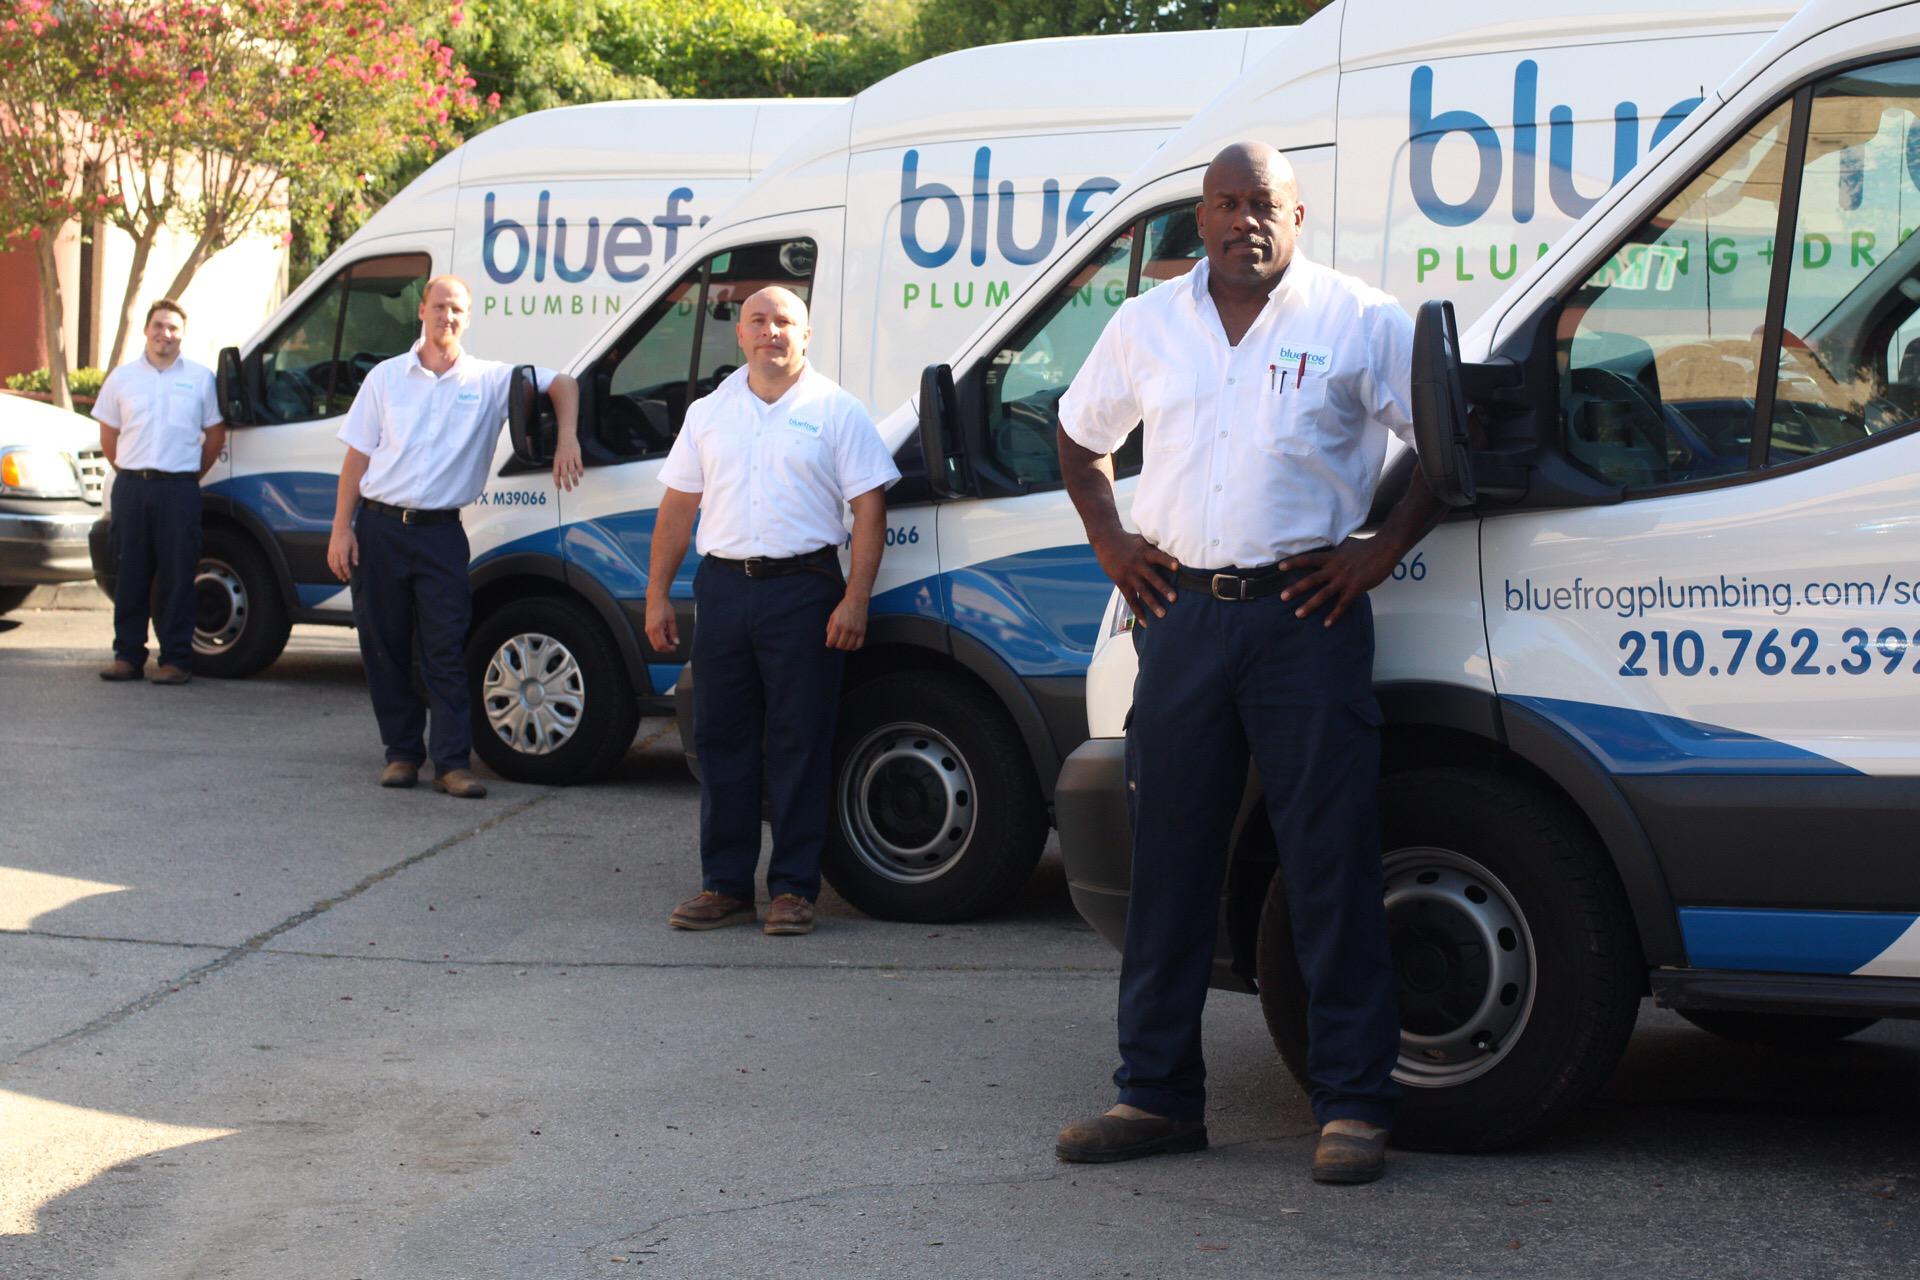 bluefrog Plumbing + Drain techs about to head out in the service van to a plumbing fixture installation and repair call in the San Antonio area.